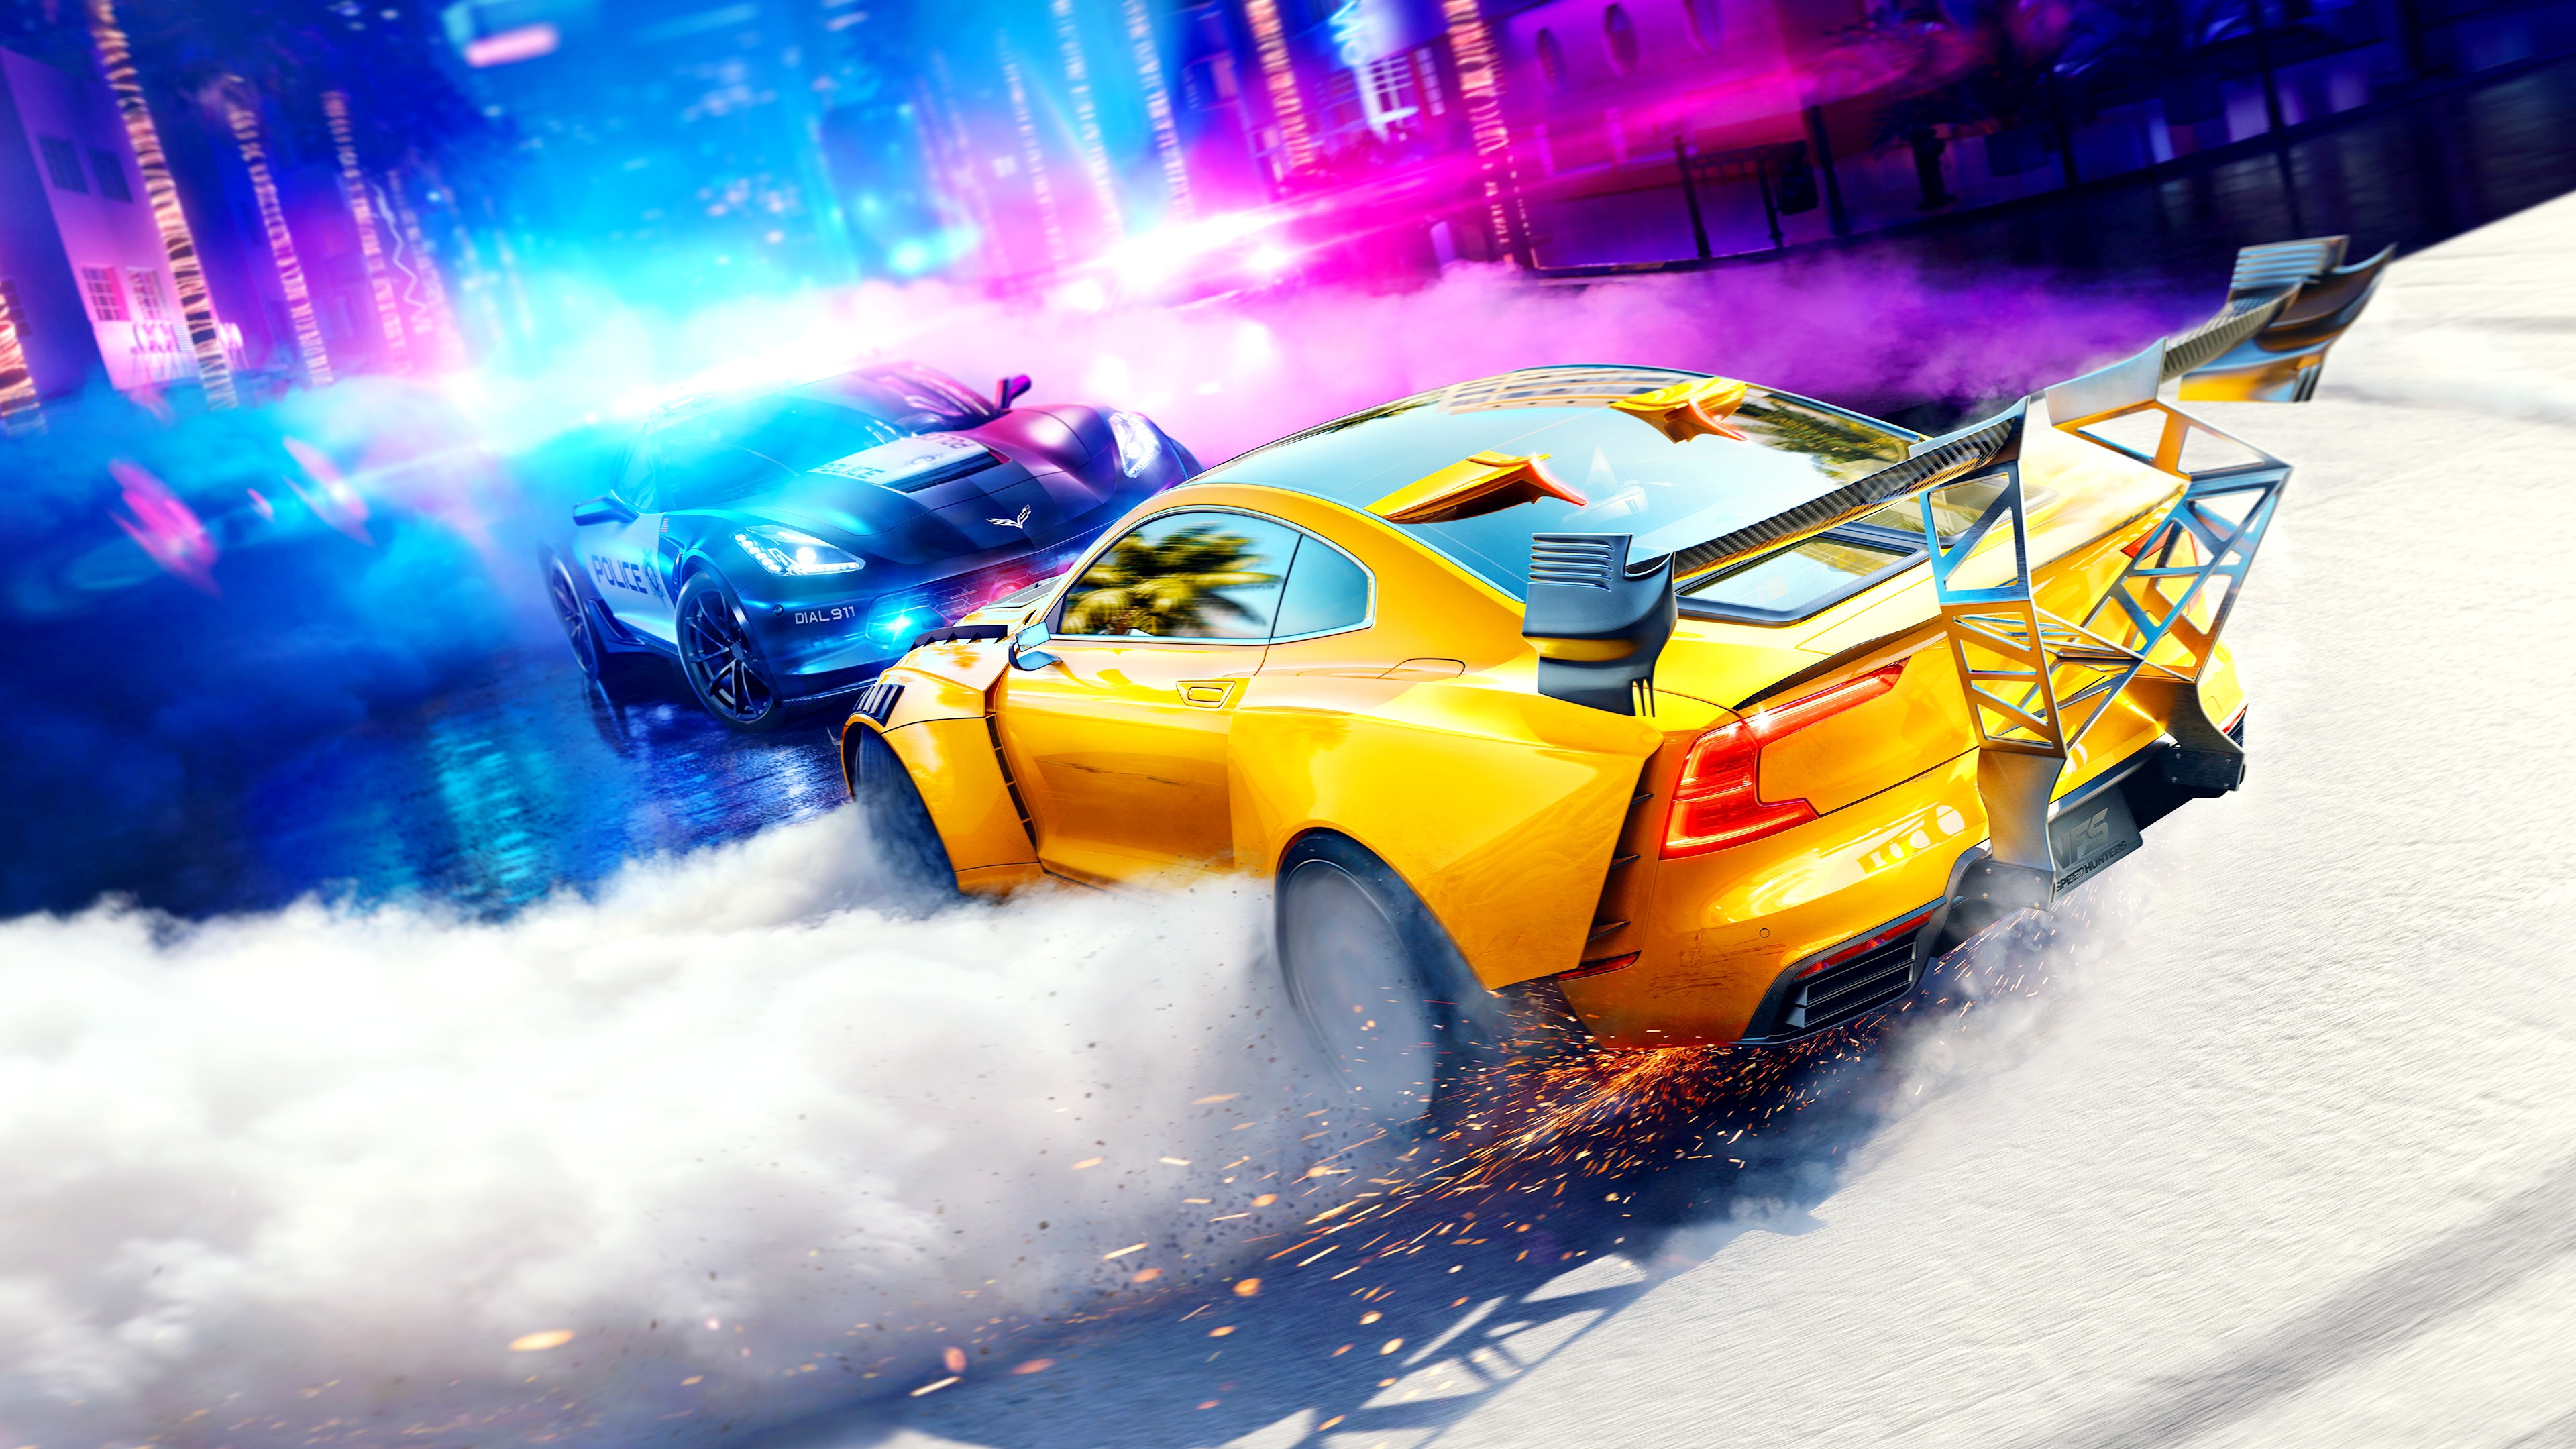 need for speed wallpaper 4k,vehicle,car,yellow,games,racing video game